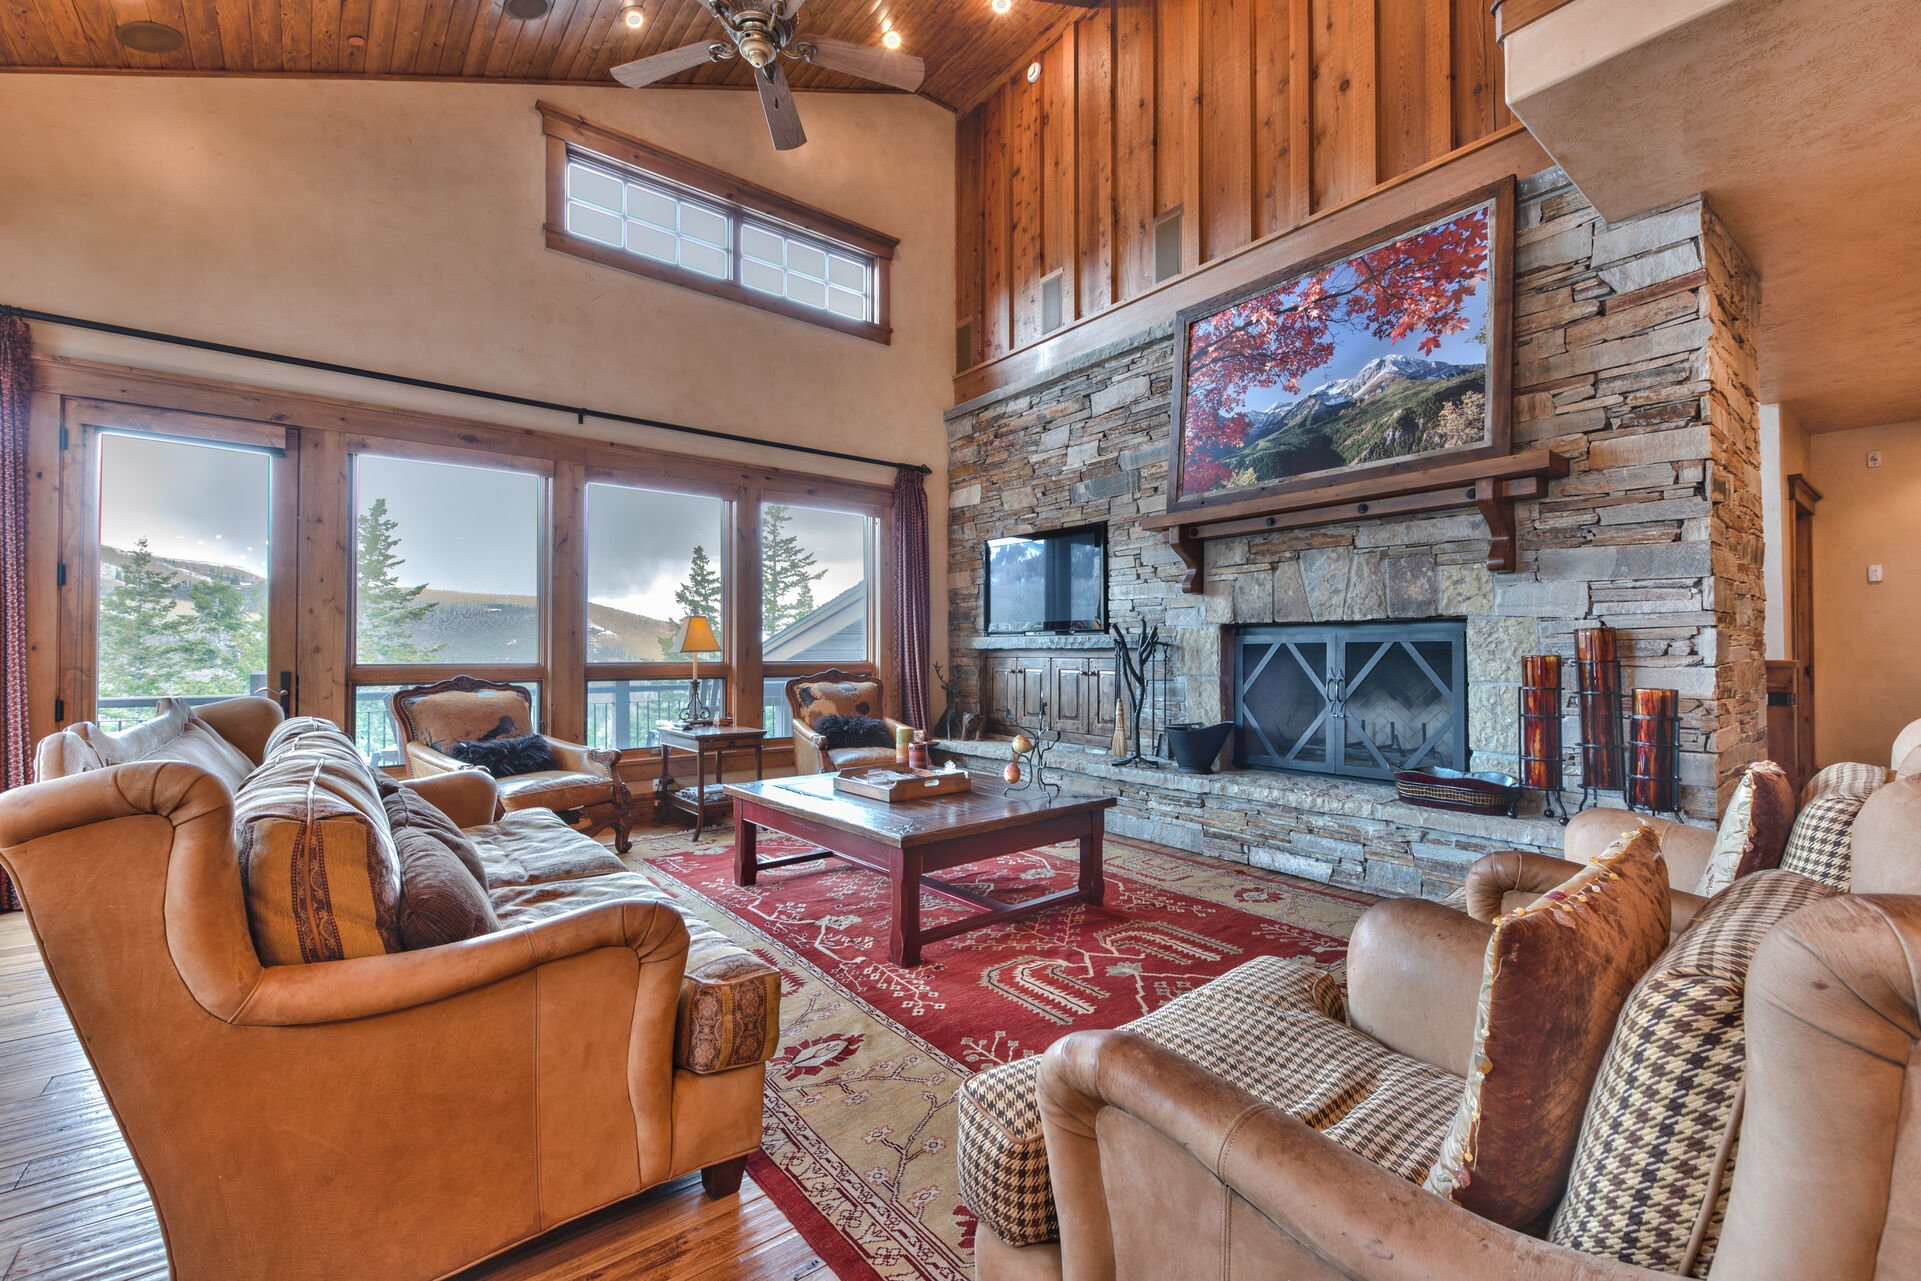 View our Park City luxury vacation rentals